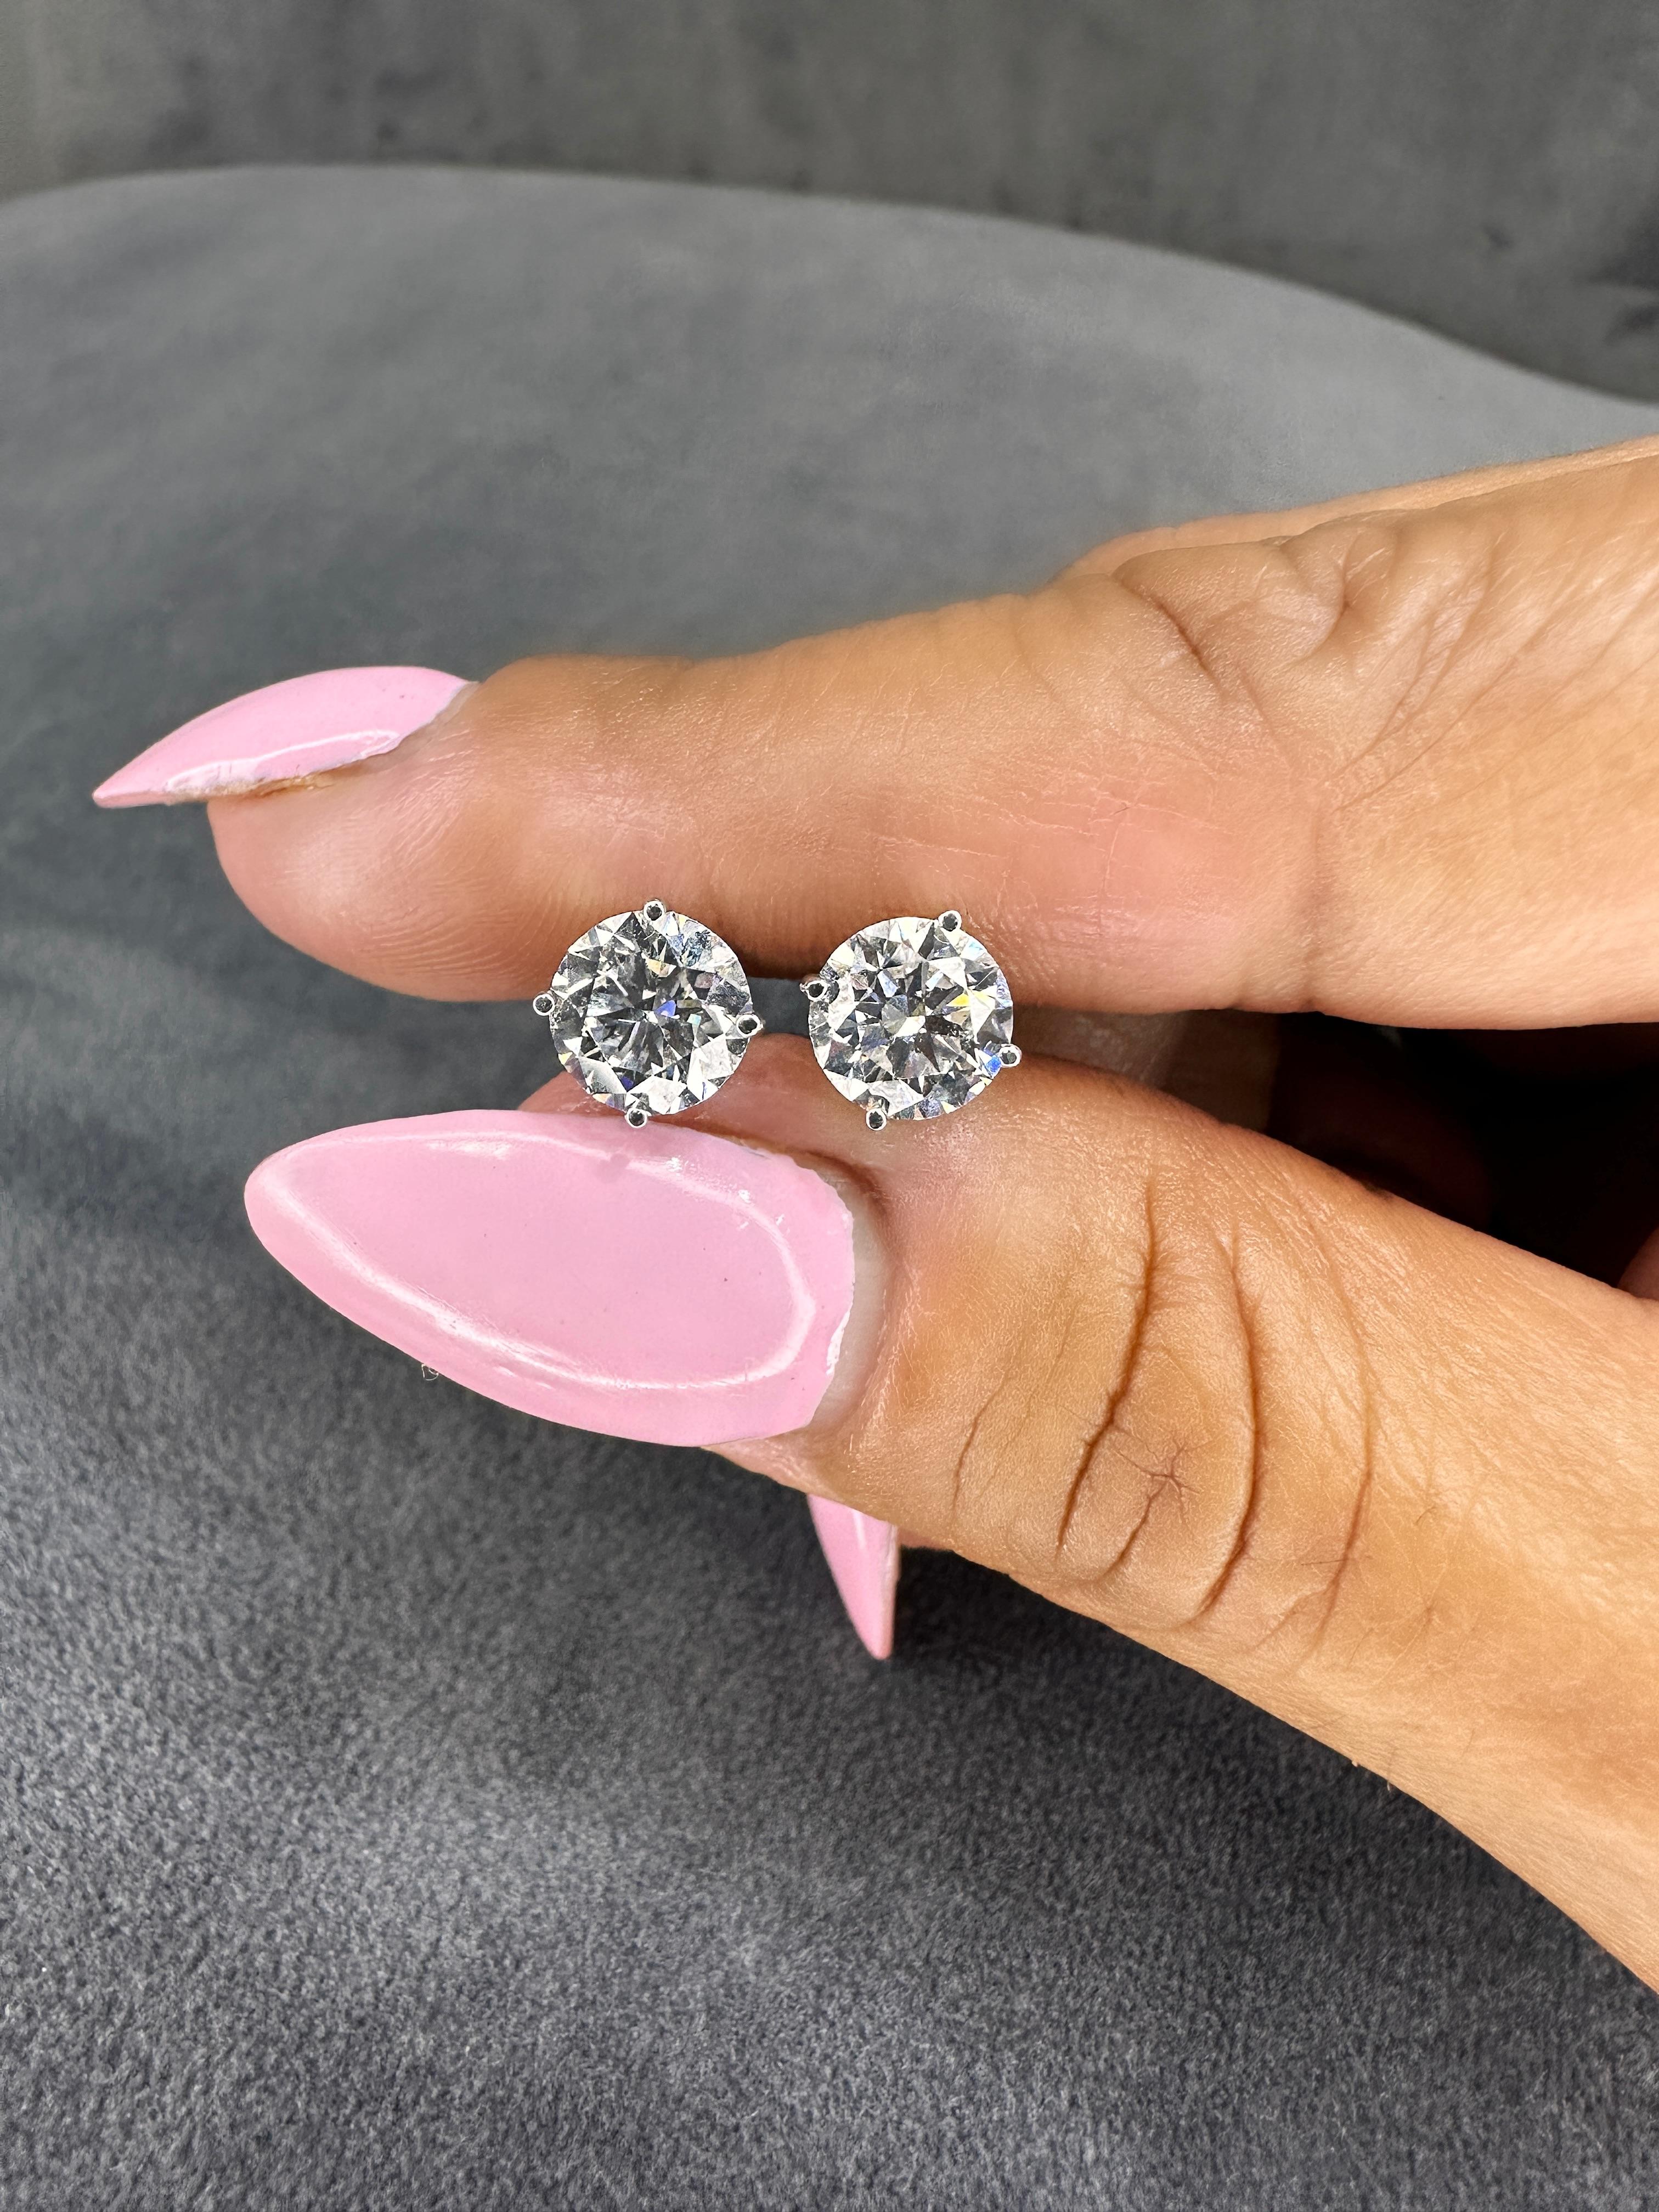 Certified Lab Round Cut 1.50 - 4.00 Carat Diamond 4-prong Stud Earrings / F, VS2 In New Condition For Sale In Los Angeles, CA